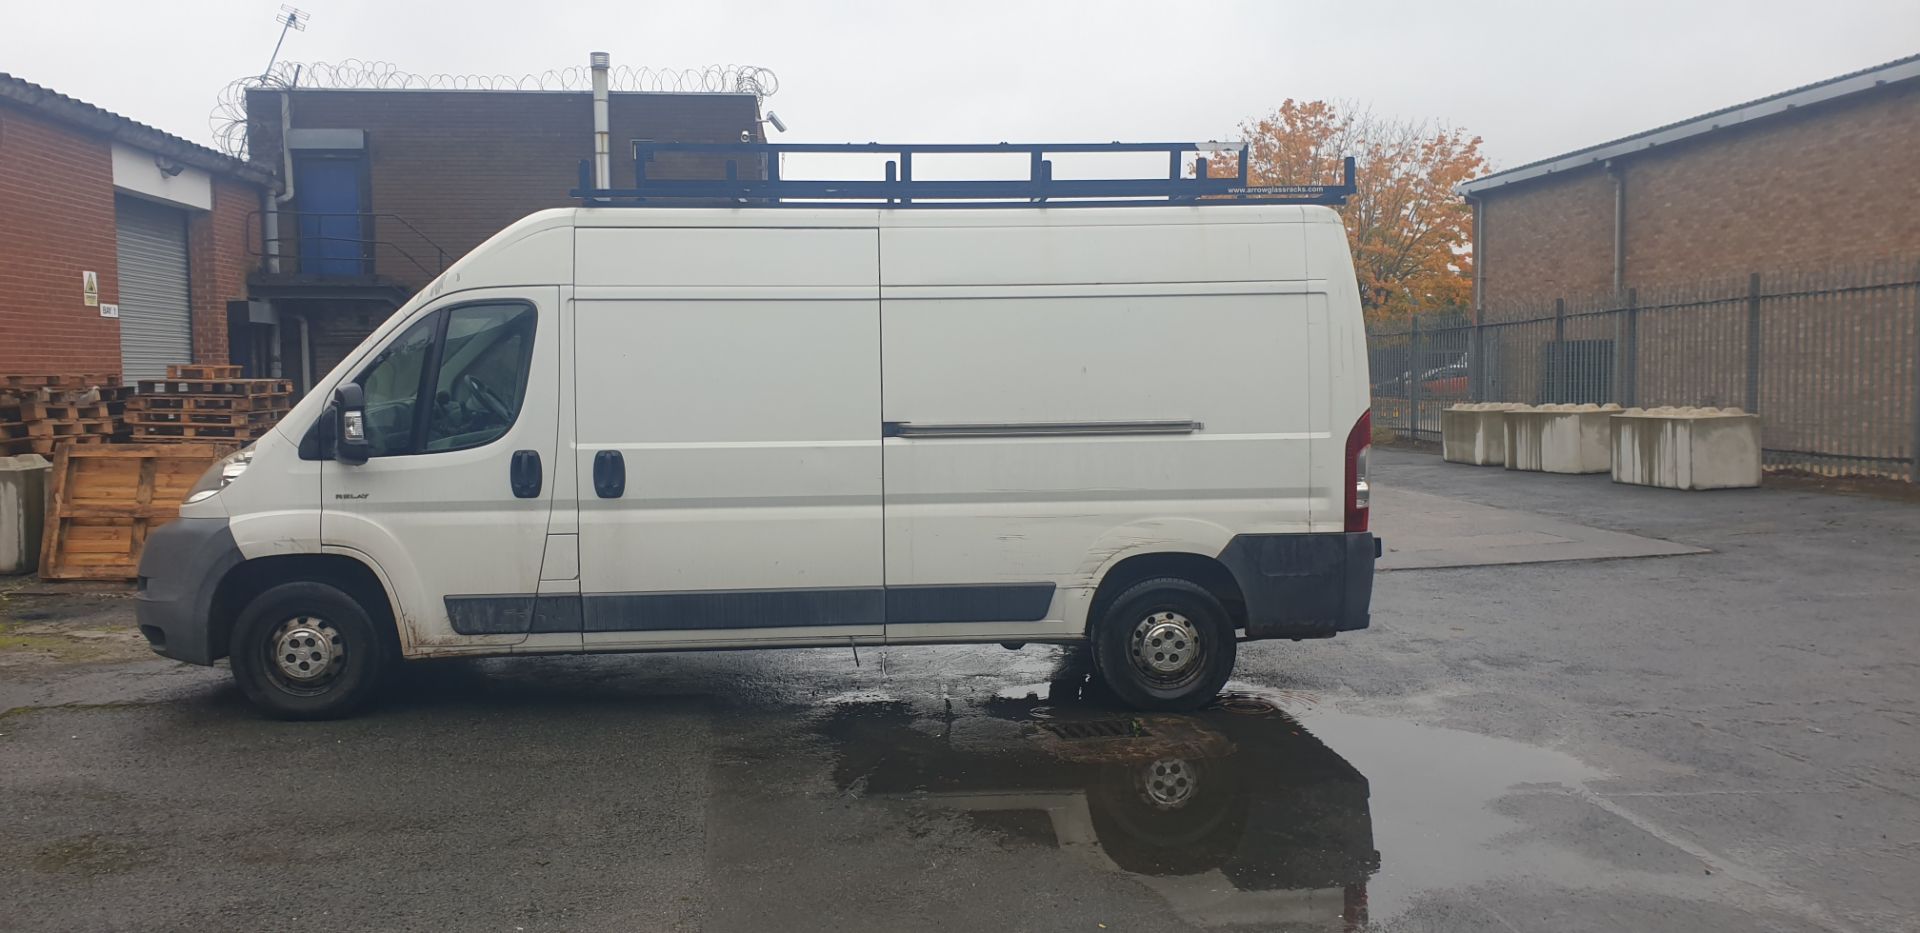 2009 Citroen Relay 35 HDI 120 LWB panel van with glass racks to side and roof - Image 12 of 30